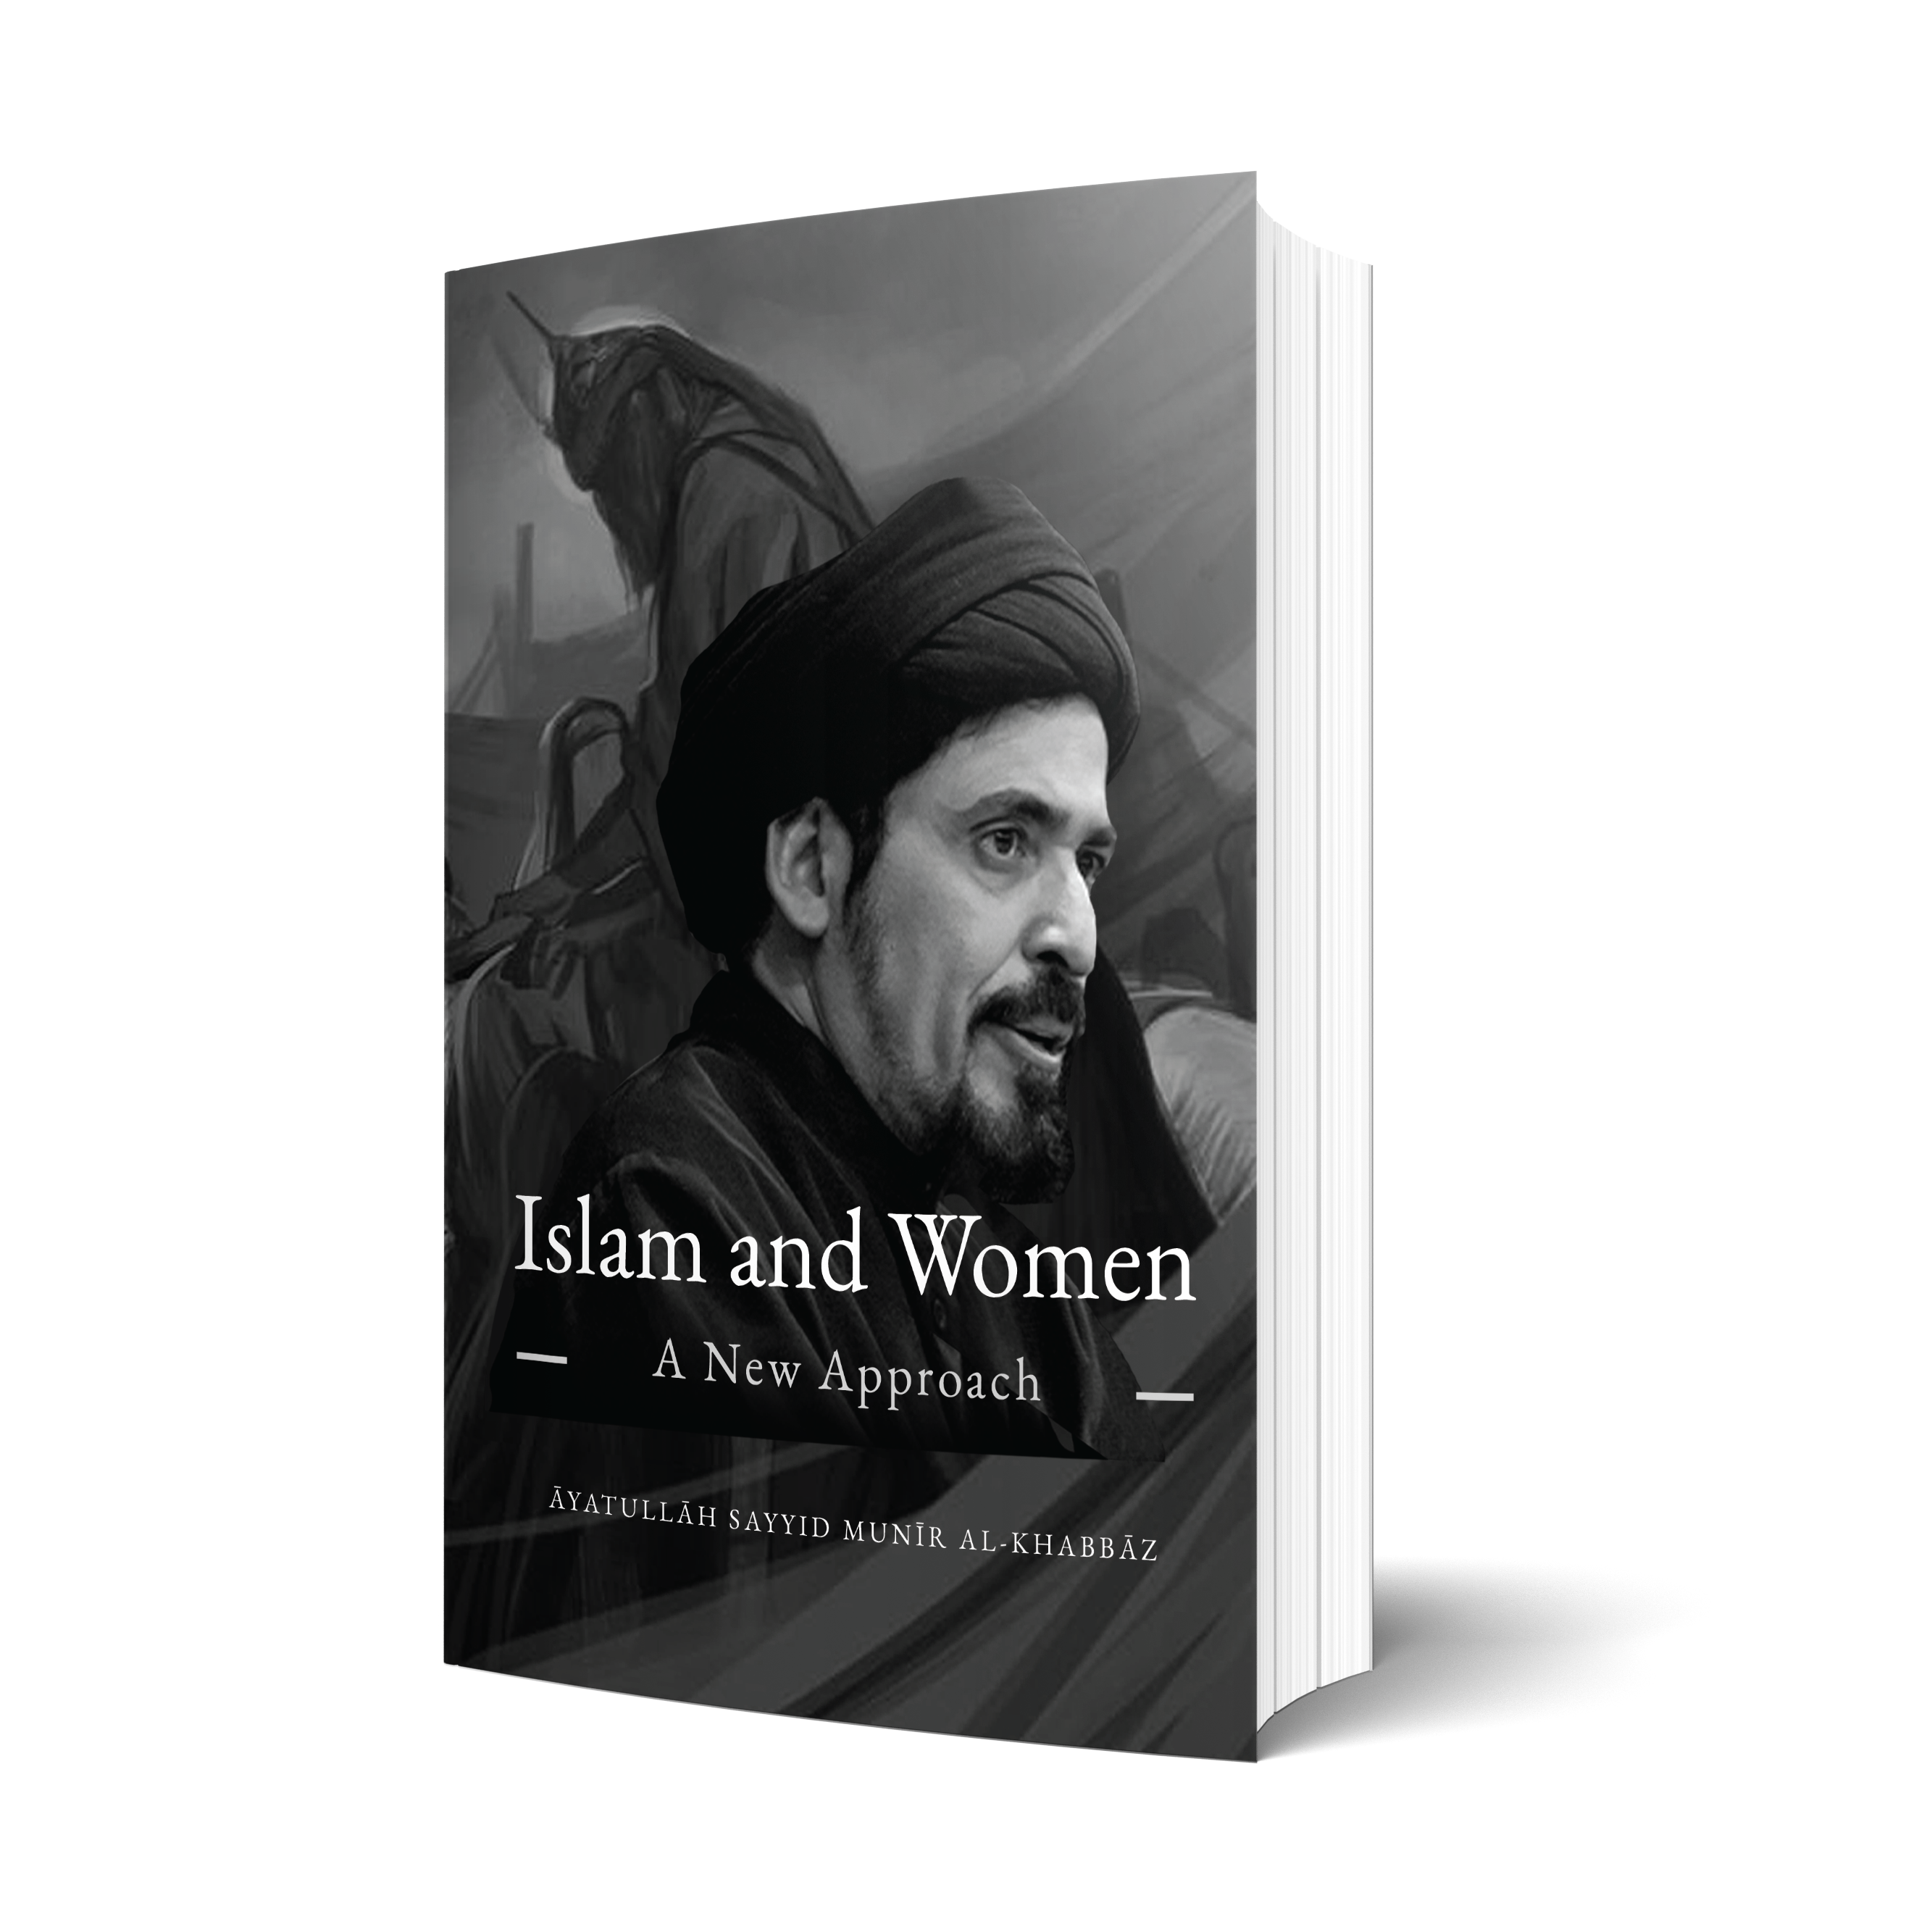 Islam and Women: A New Approach